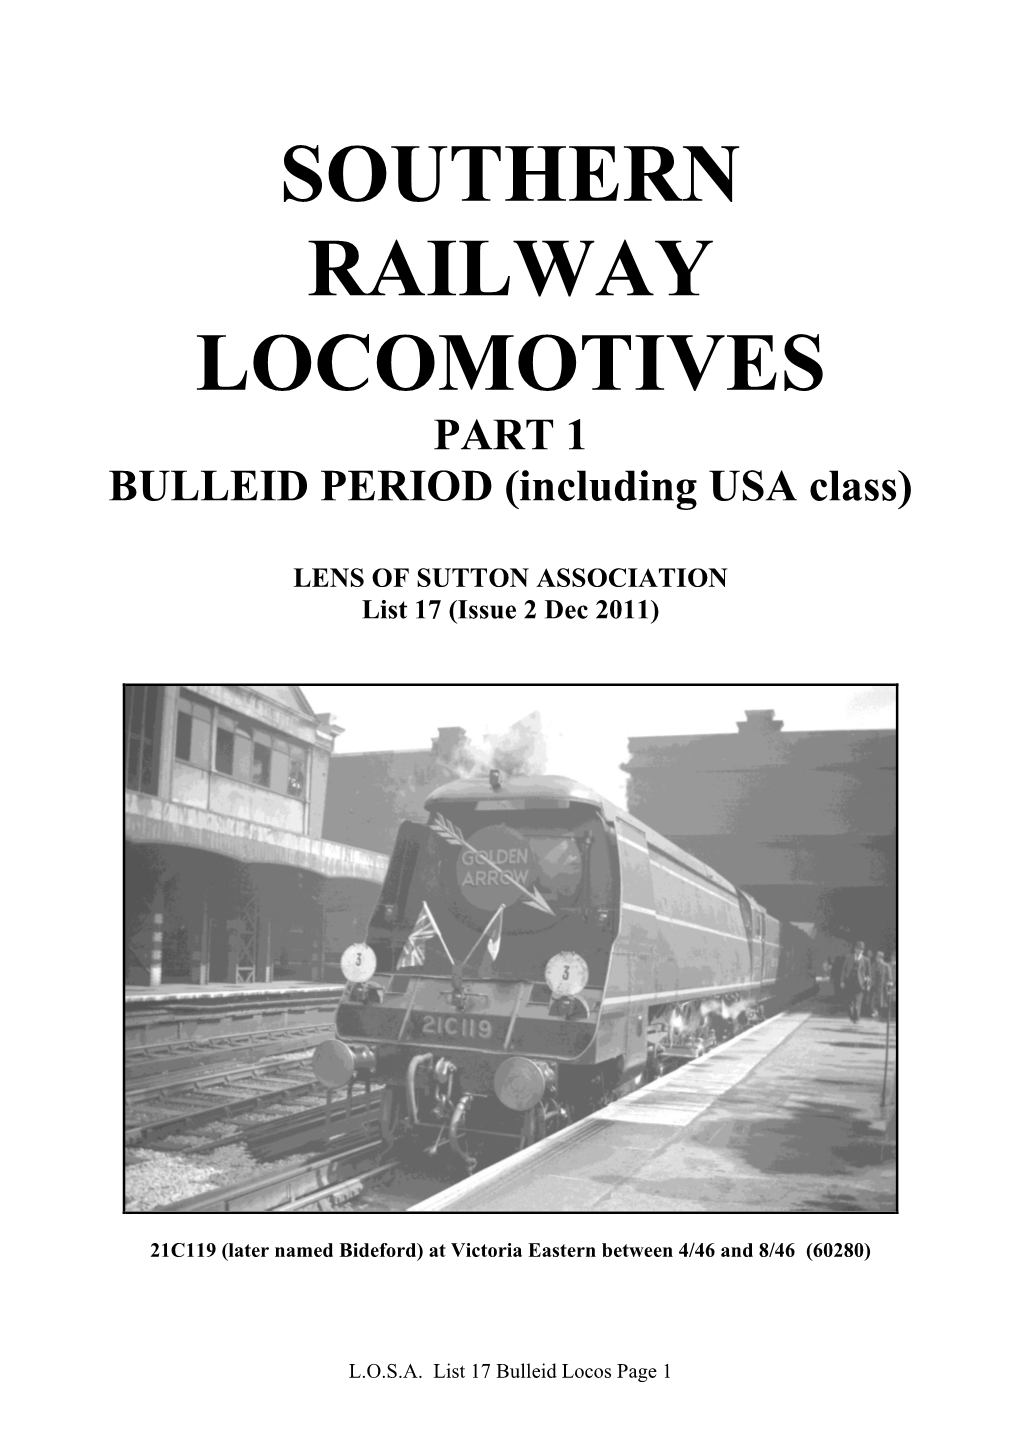 SOUTHERN RAILWAY LOCOMOTIVES PART 1 BULLEID PERIOD (Including USA Class)